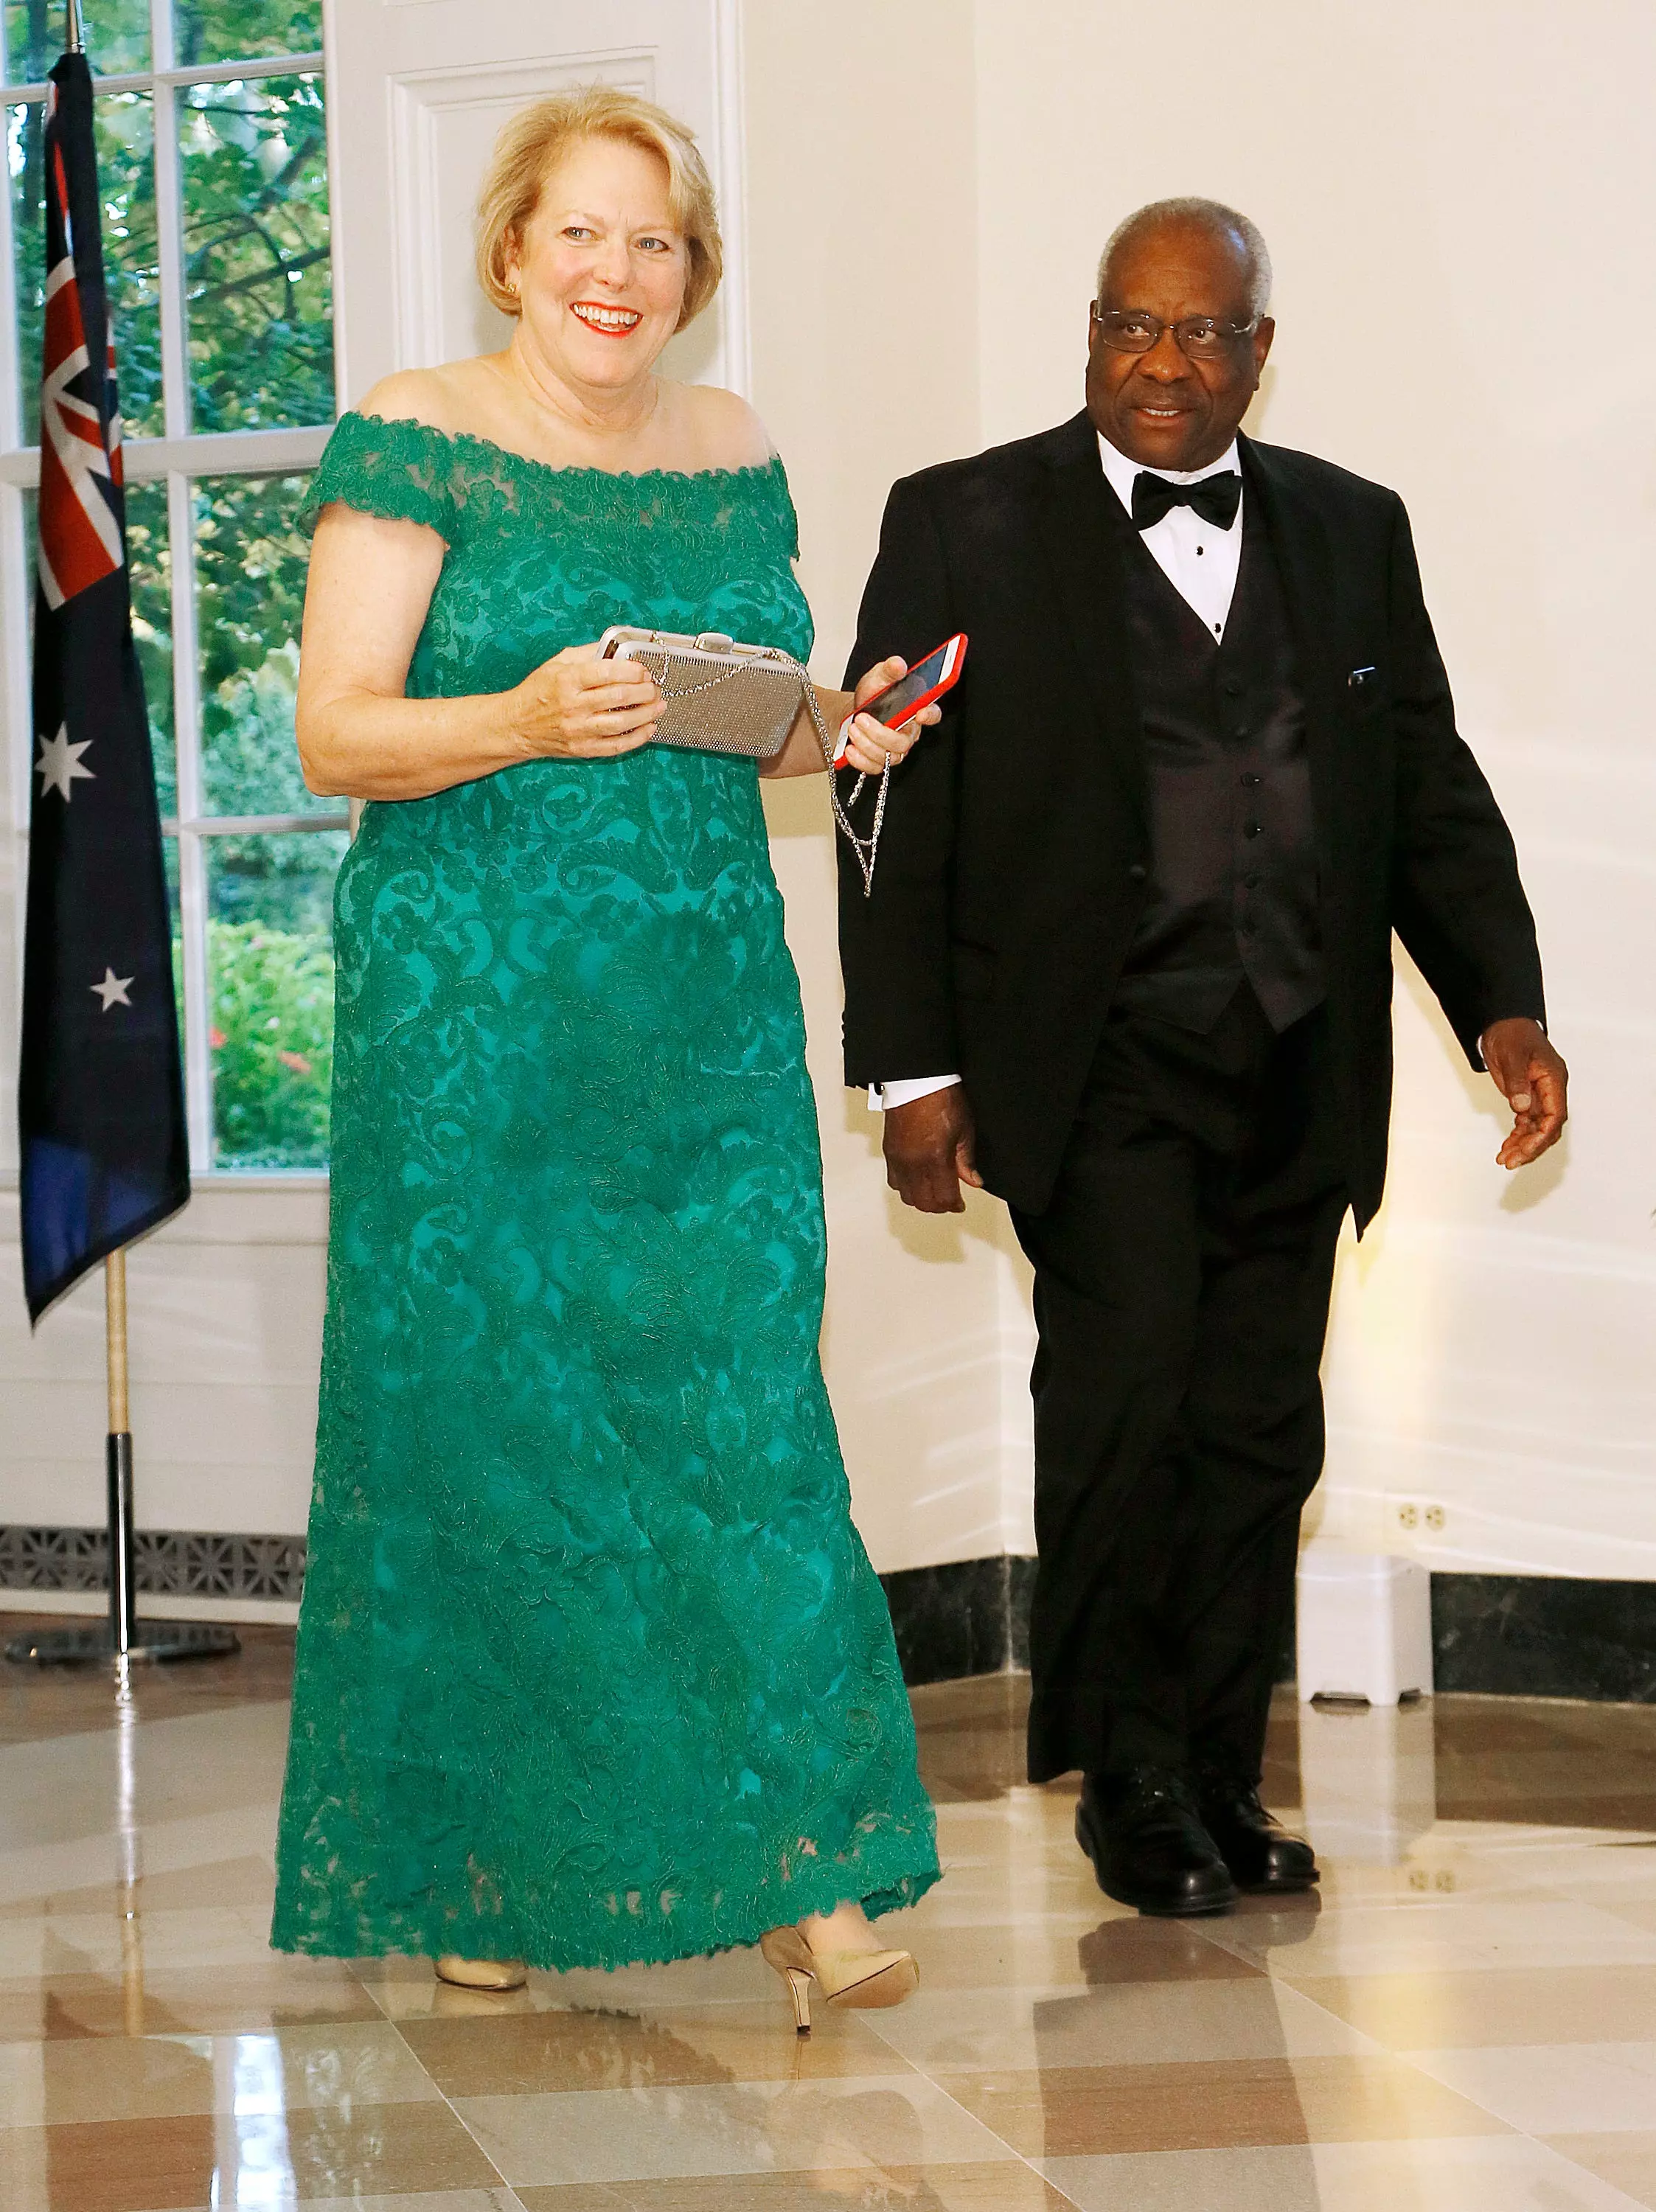 Supreme Court Justice Clarence Thomas and Virginia Thomas.